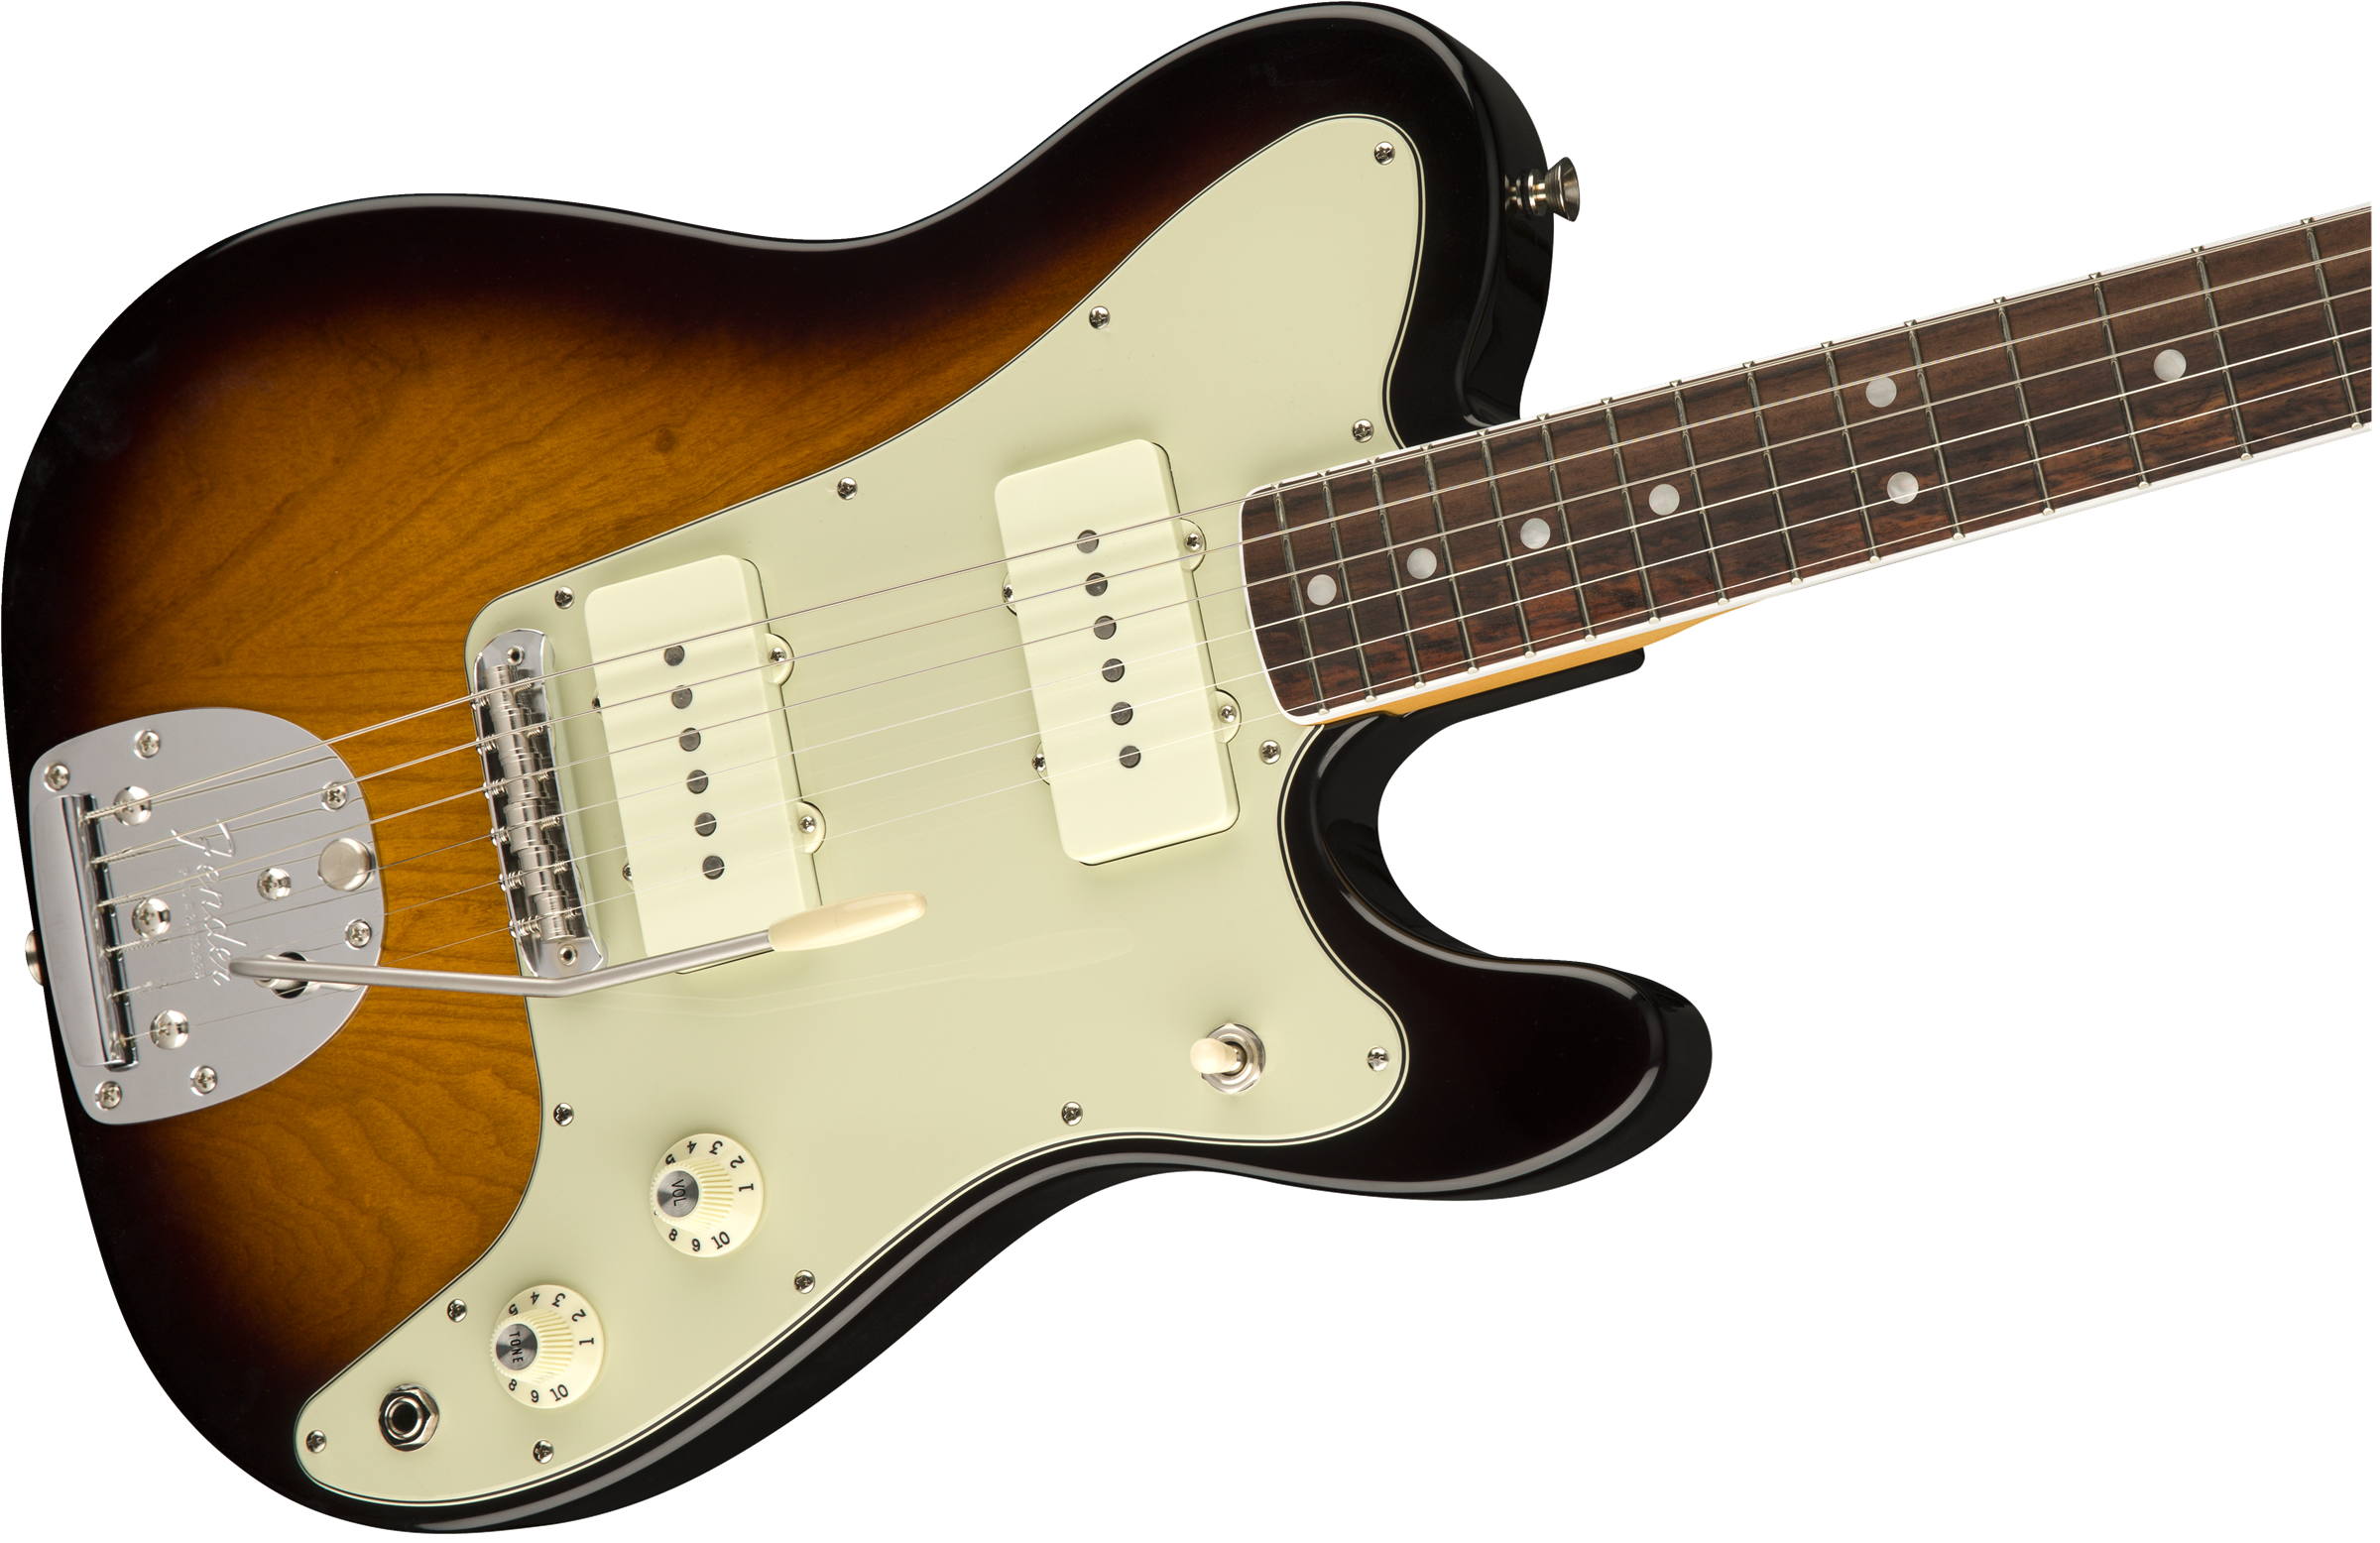 Fender Limited Edition Jazz Tele Parallel Universe Series in 2 Color Sunburst 0176010703 Last One SERIAL NUMBER US18008956 - 8.2 LBS